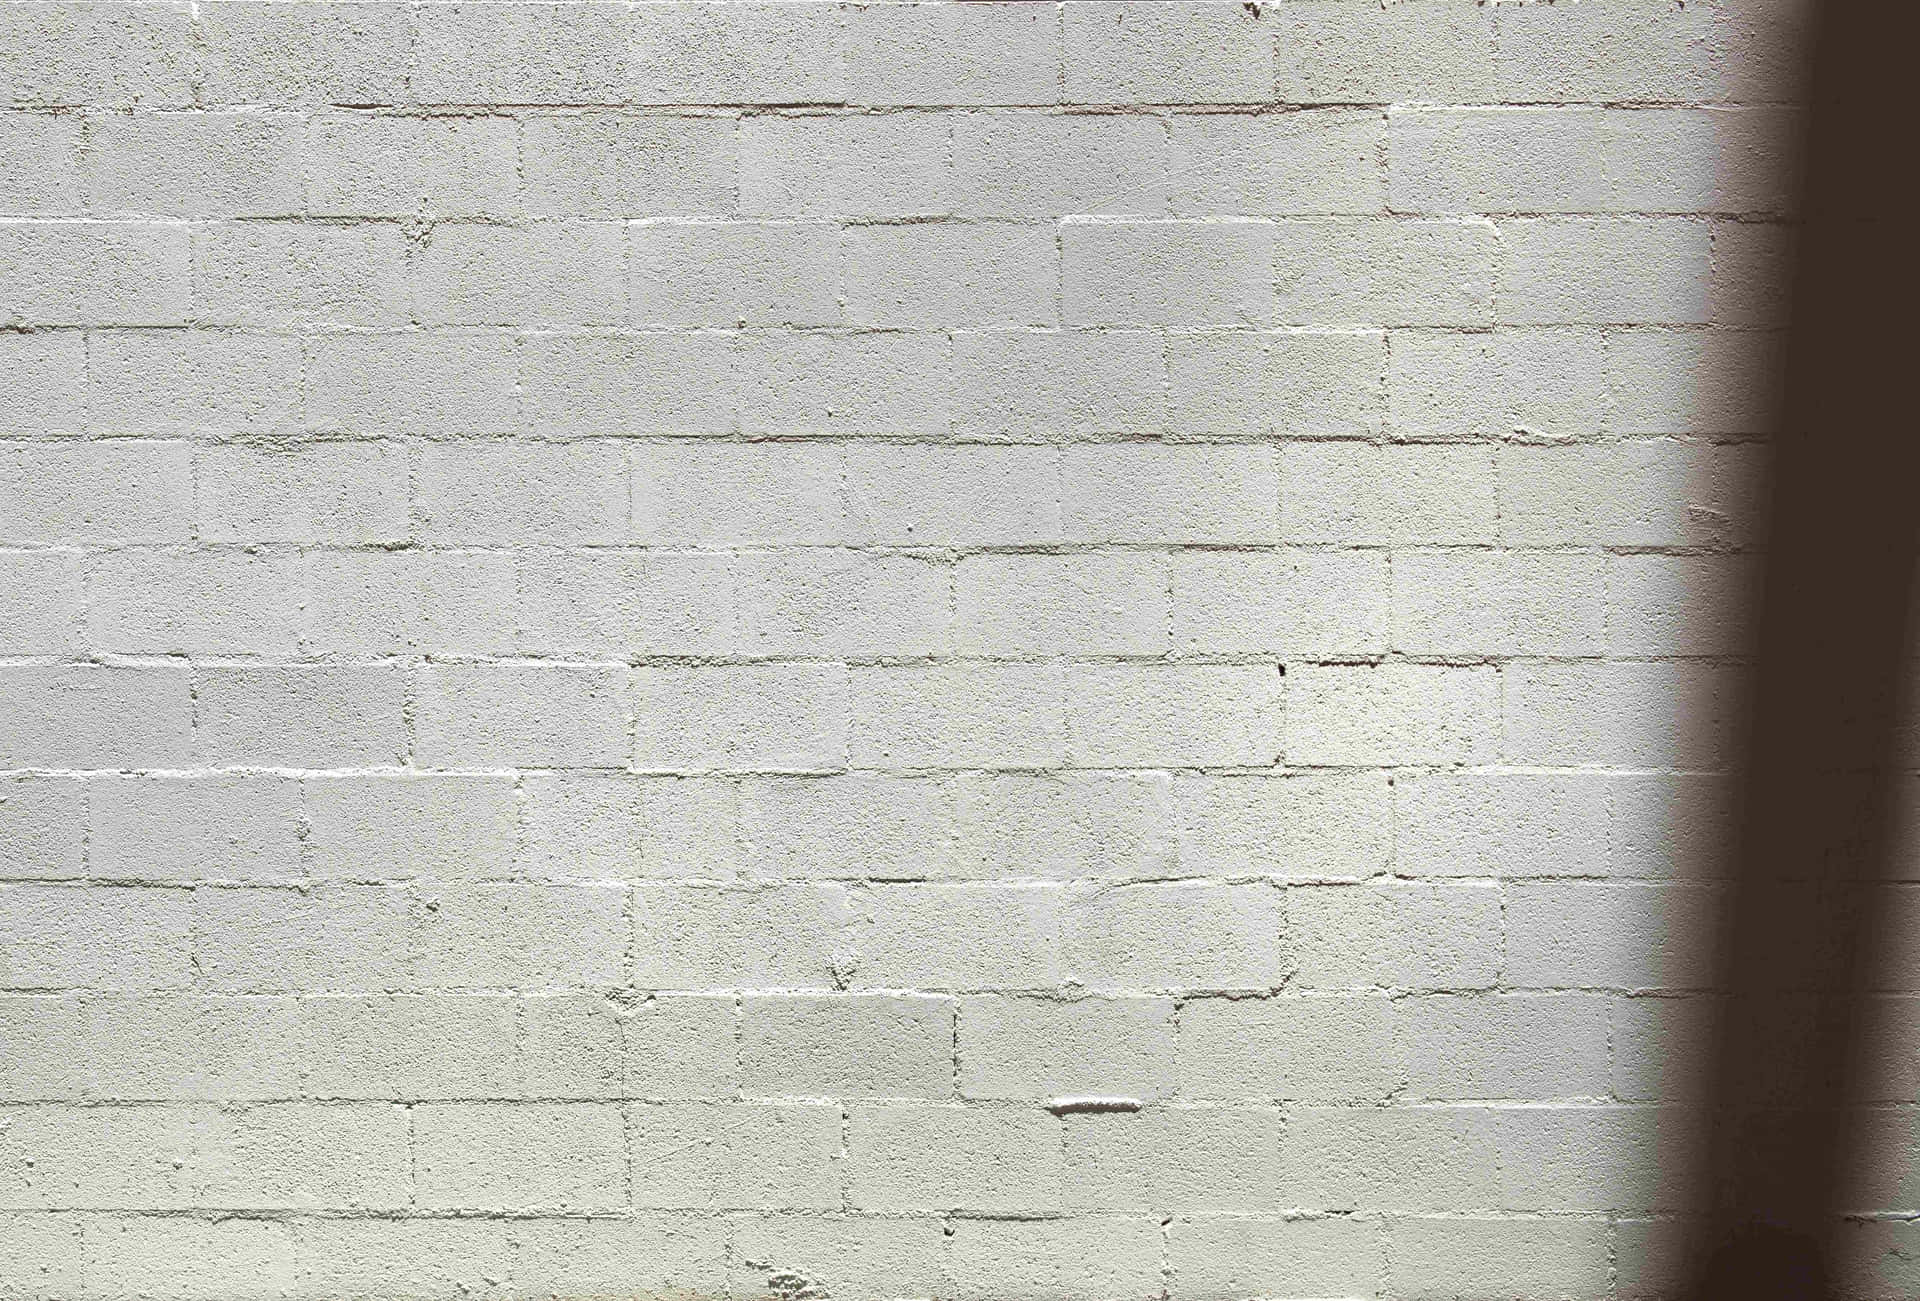 "A Textured White Brick Wall Image"